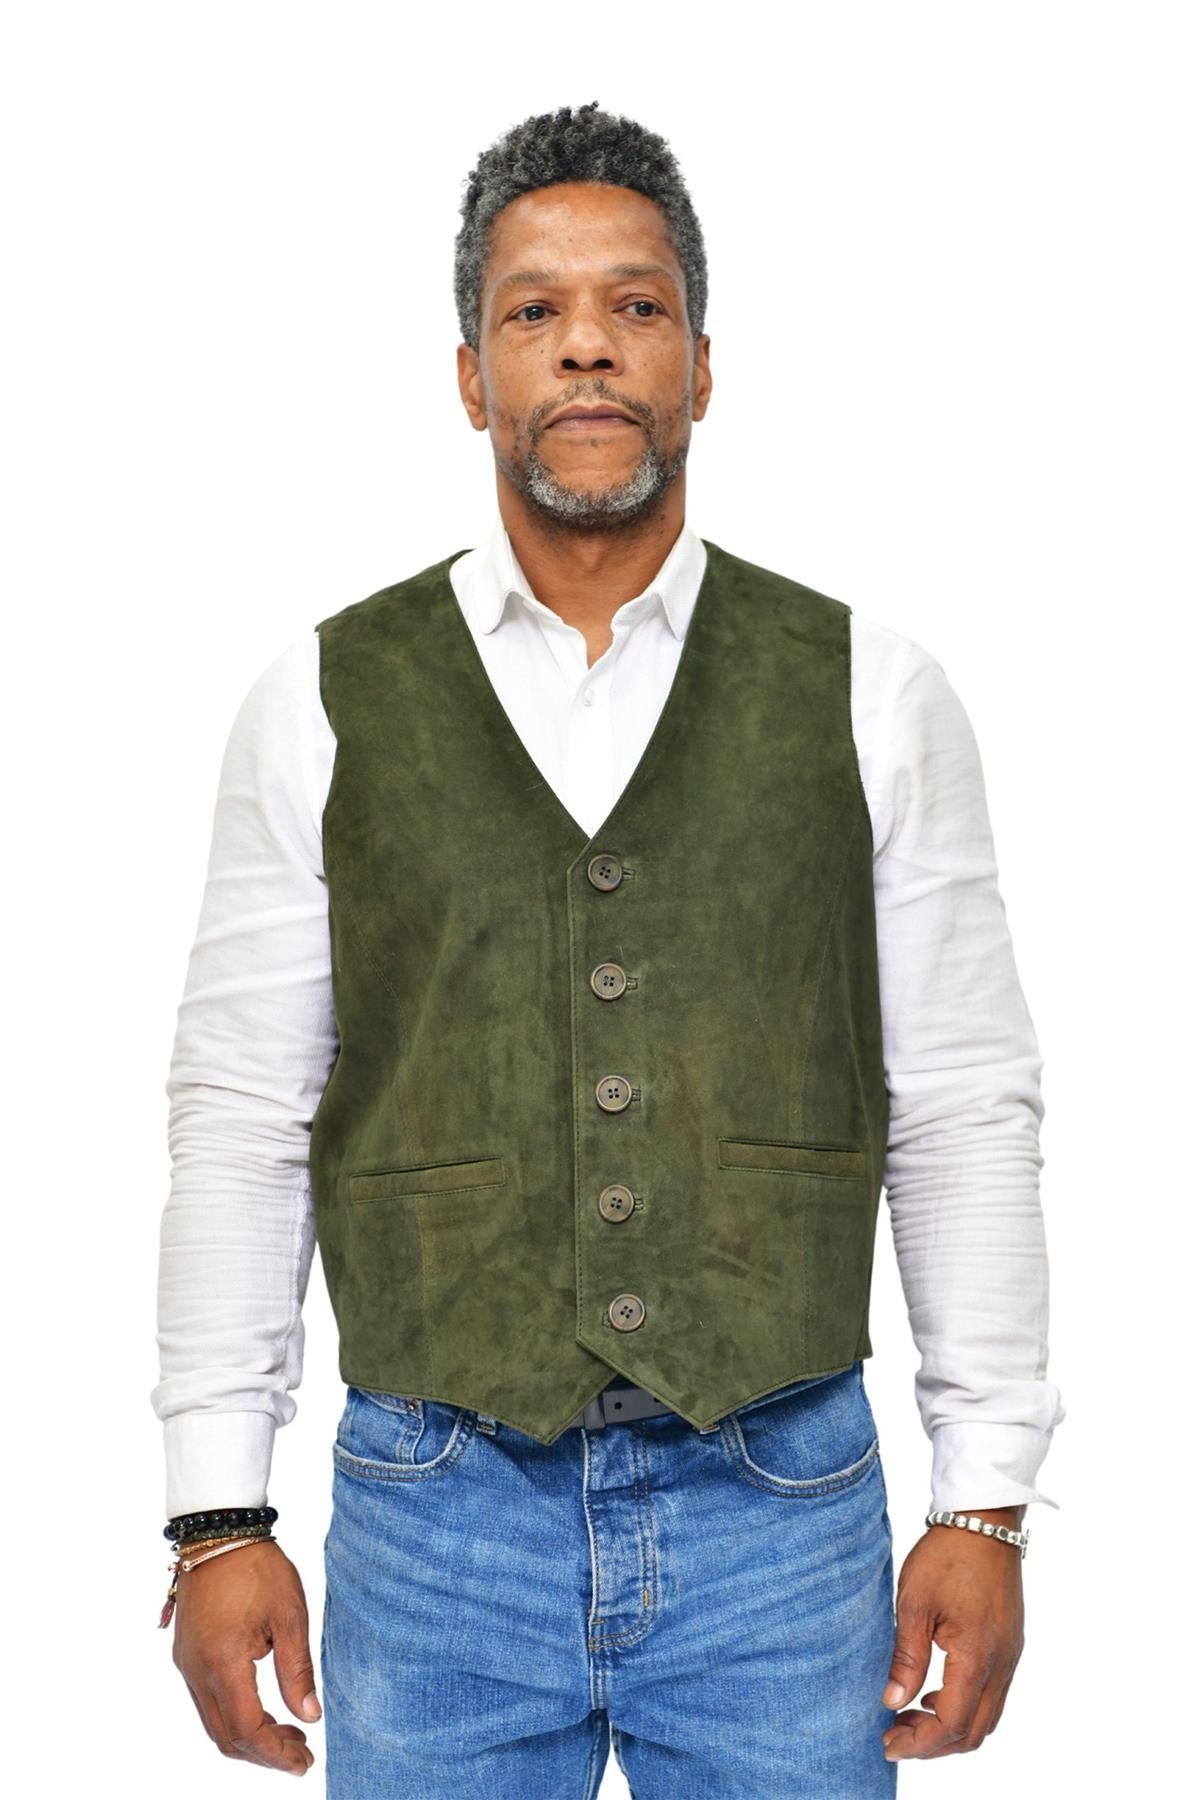 Mens Classic Goat Suede Leather Waistcoat-Norwich